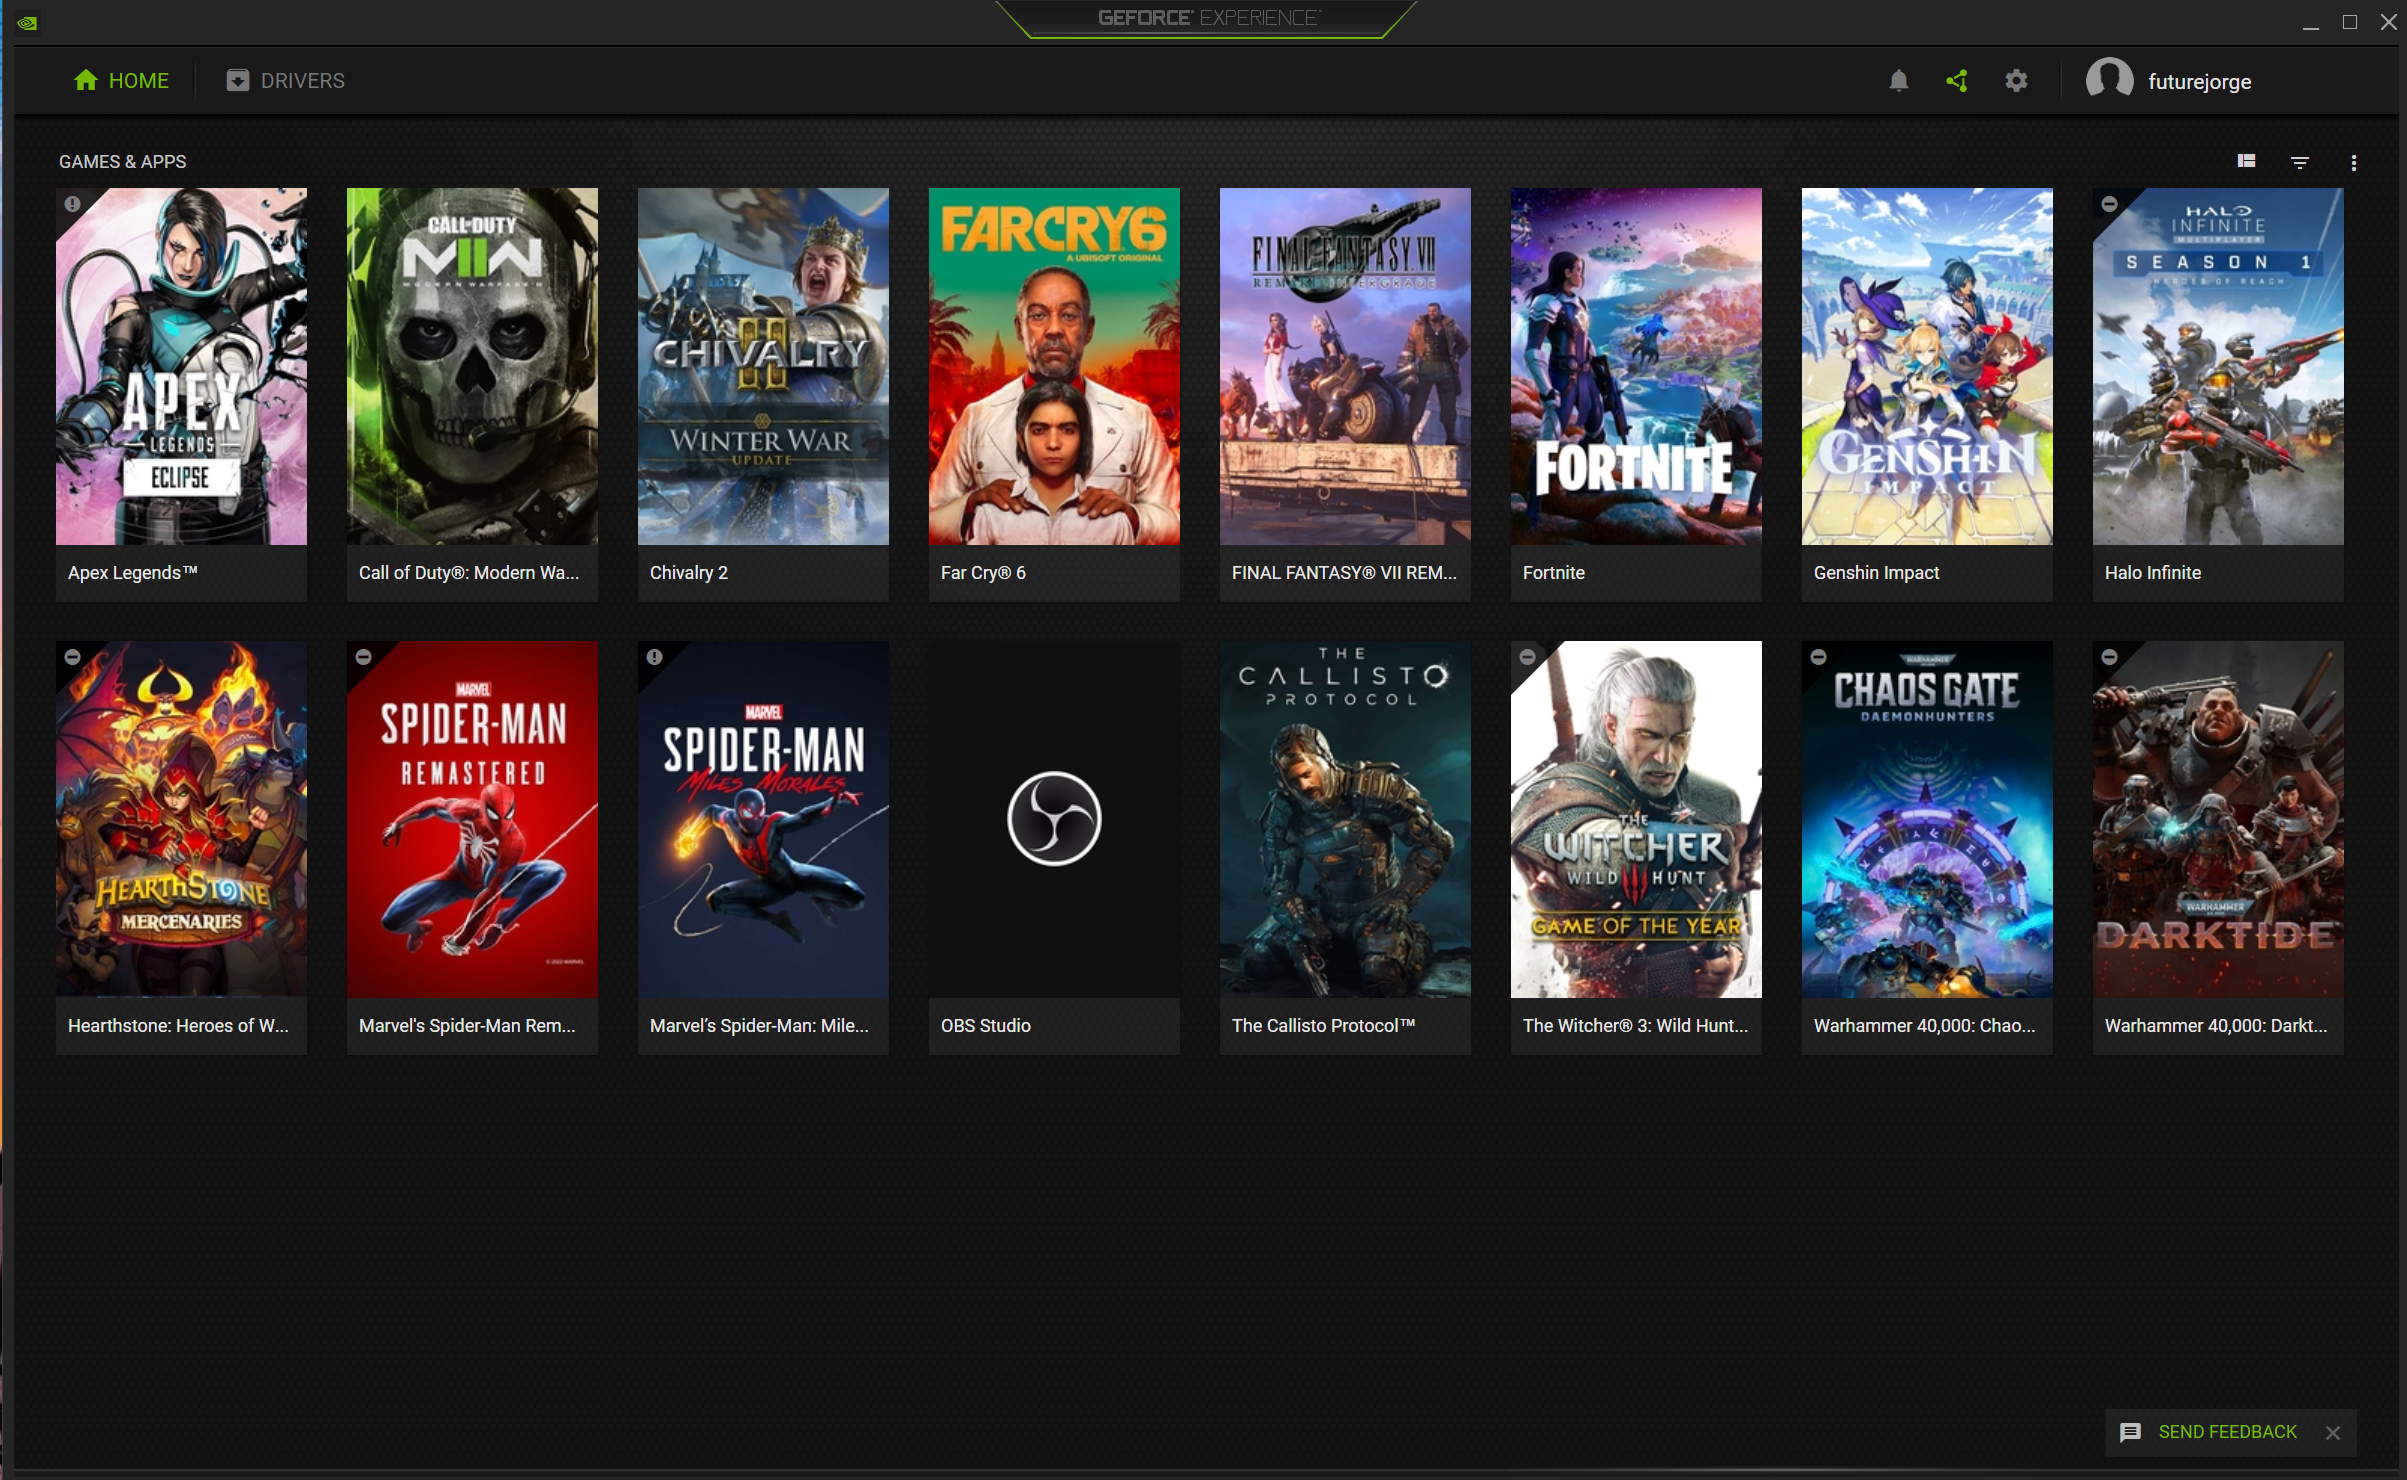 You can now play some PC games on your Xbox, thanks to Nvidia